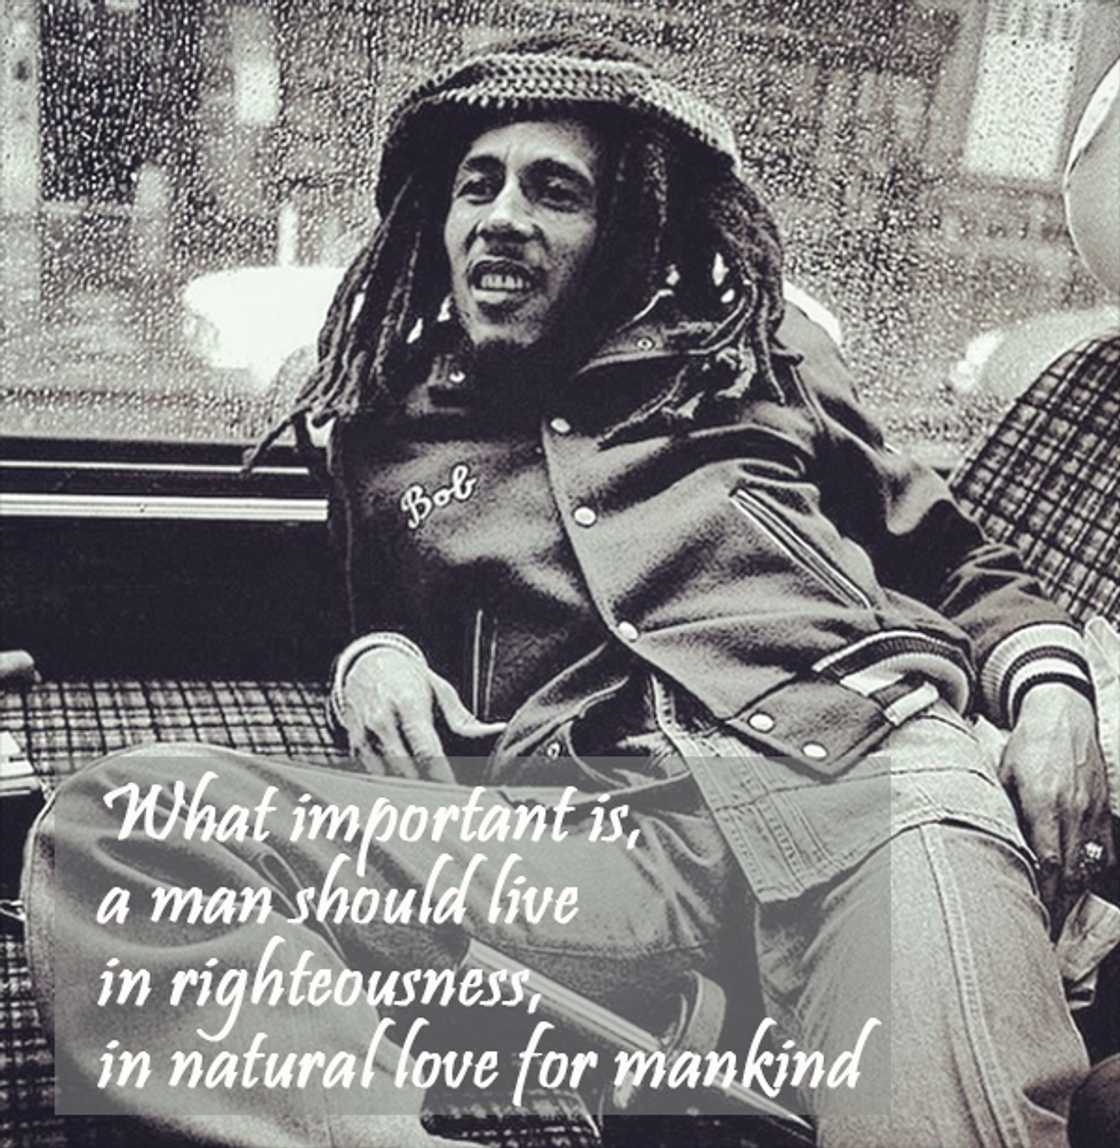 Bob Marley quotes about life